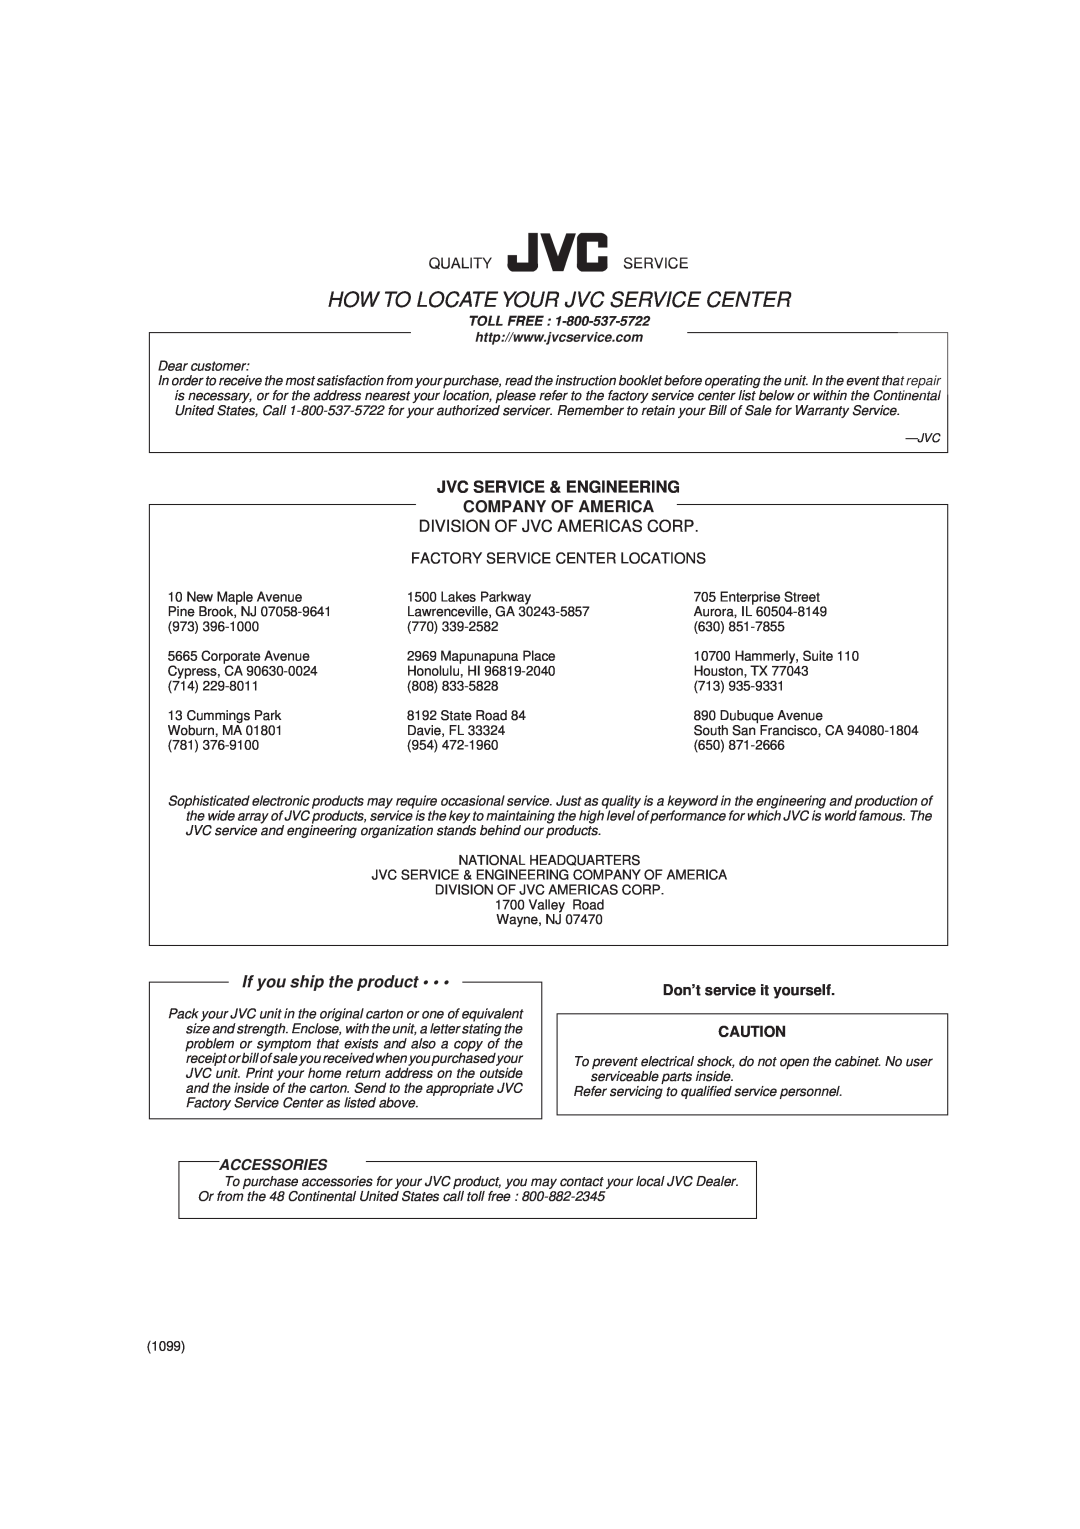 JVC MX-G50 Jvc Service & Engineering Company Of America, Qualityservice, Factory Service Center Locations, Accessories 